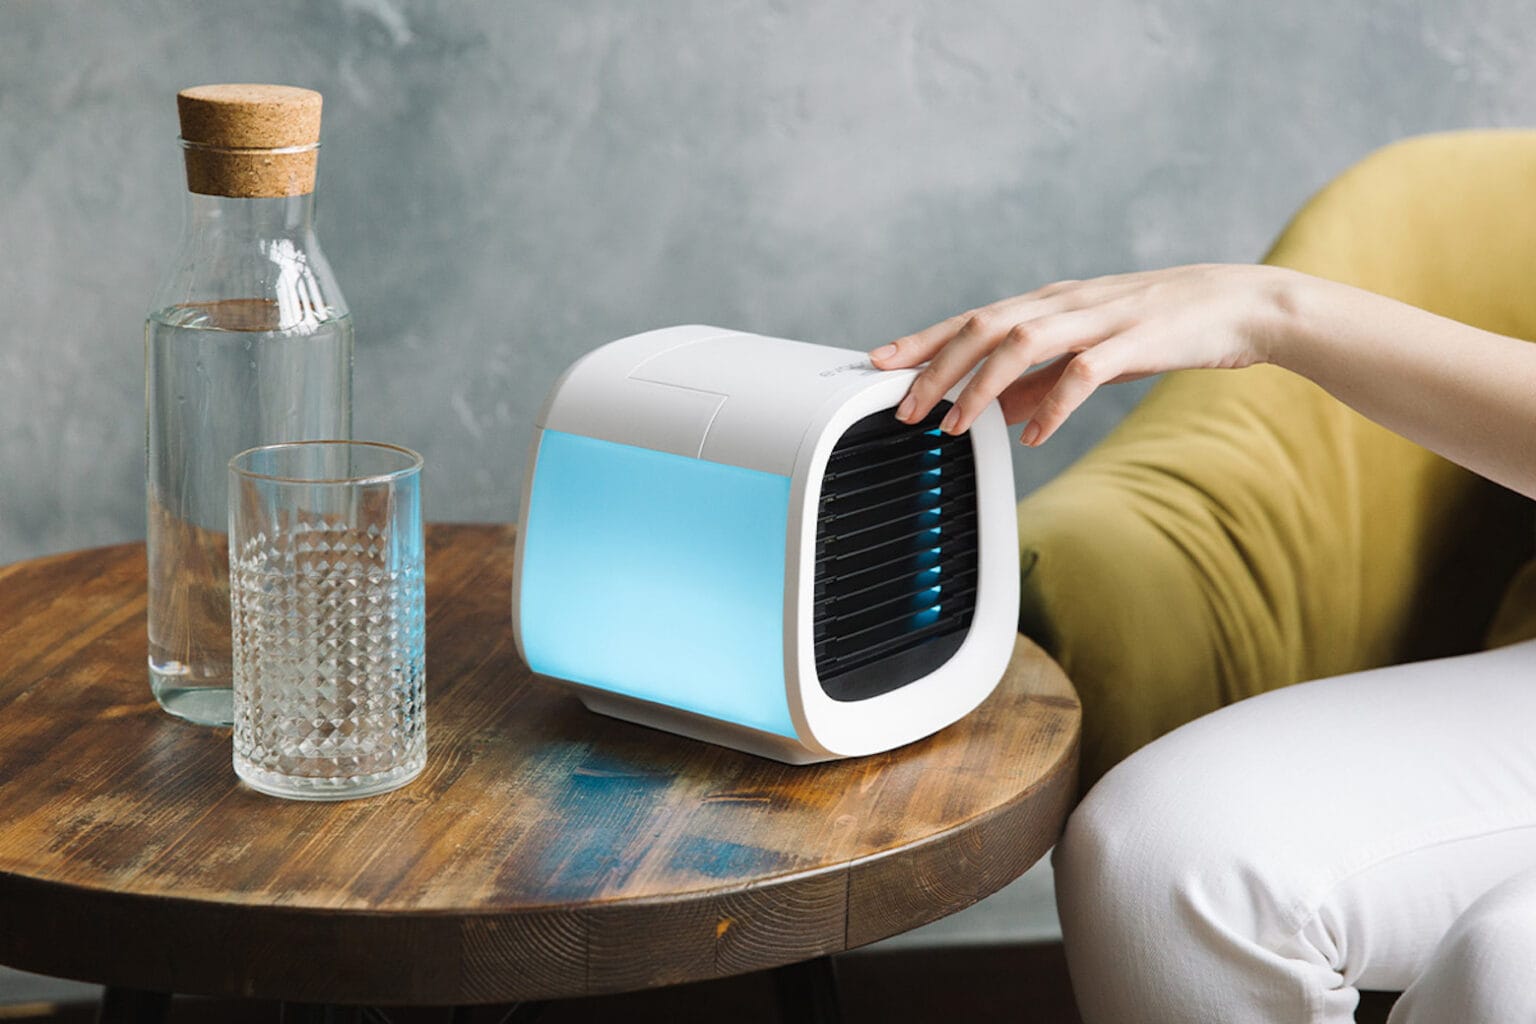 Chill out with a portable air conditioner for the cool price of $78.99.